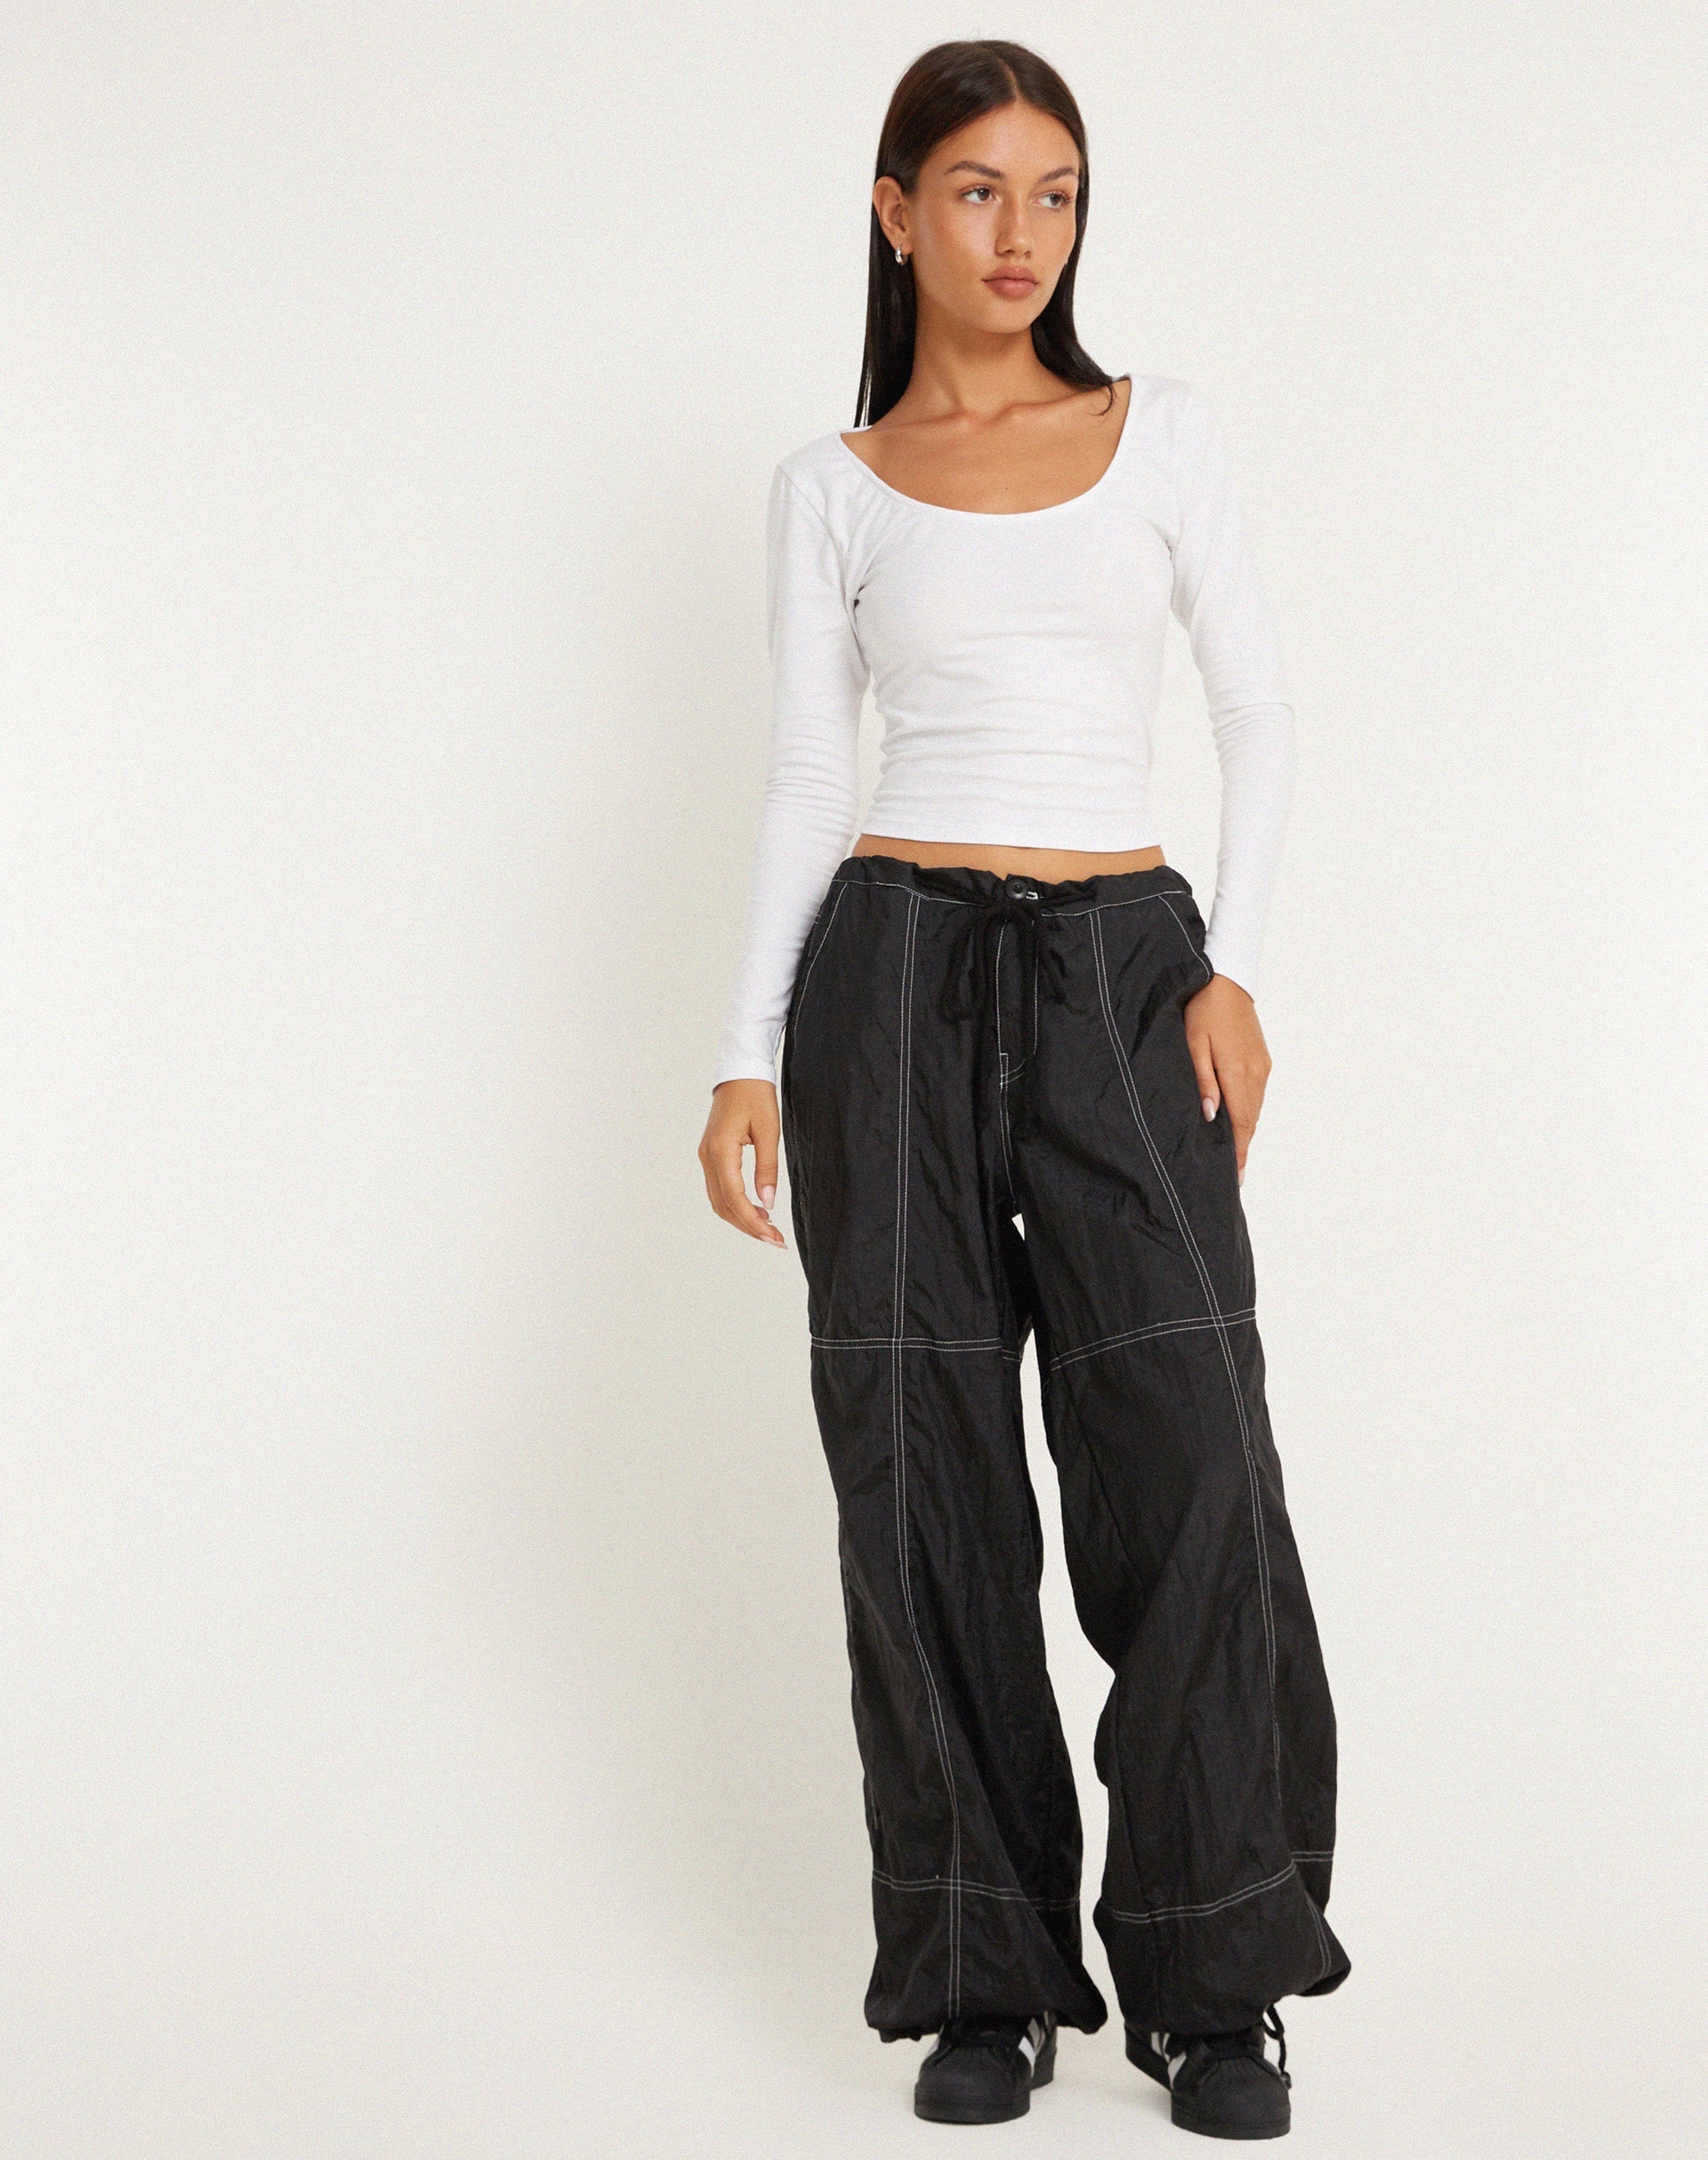 image of Phil Low Waist Trouser in Black with White Top Stitch